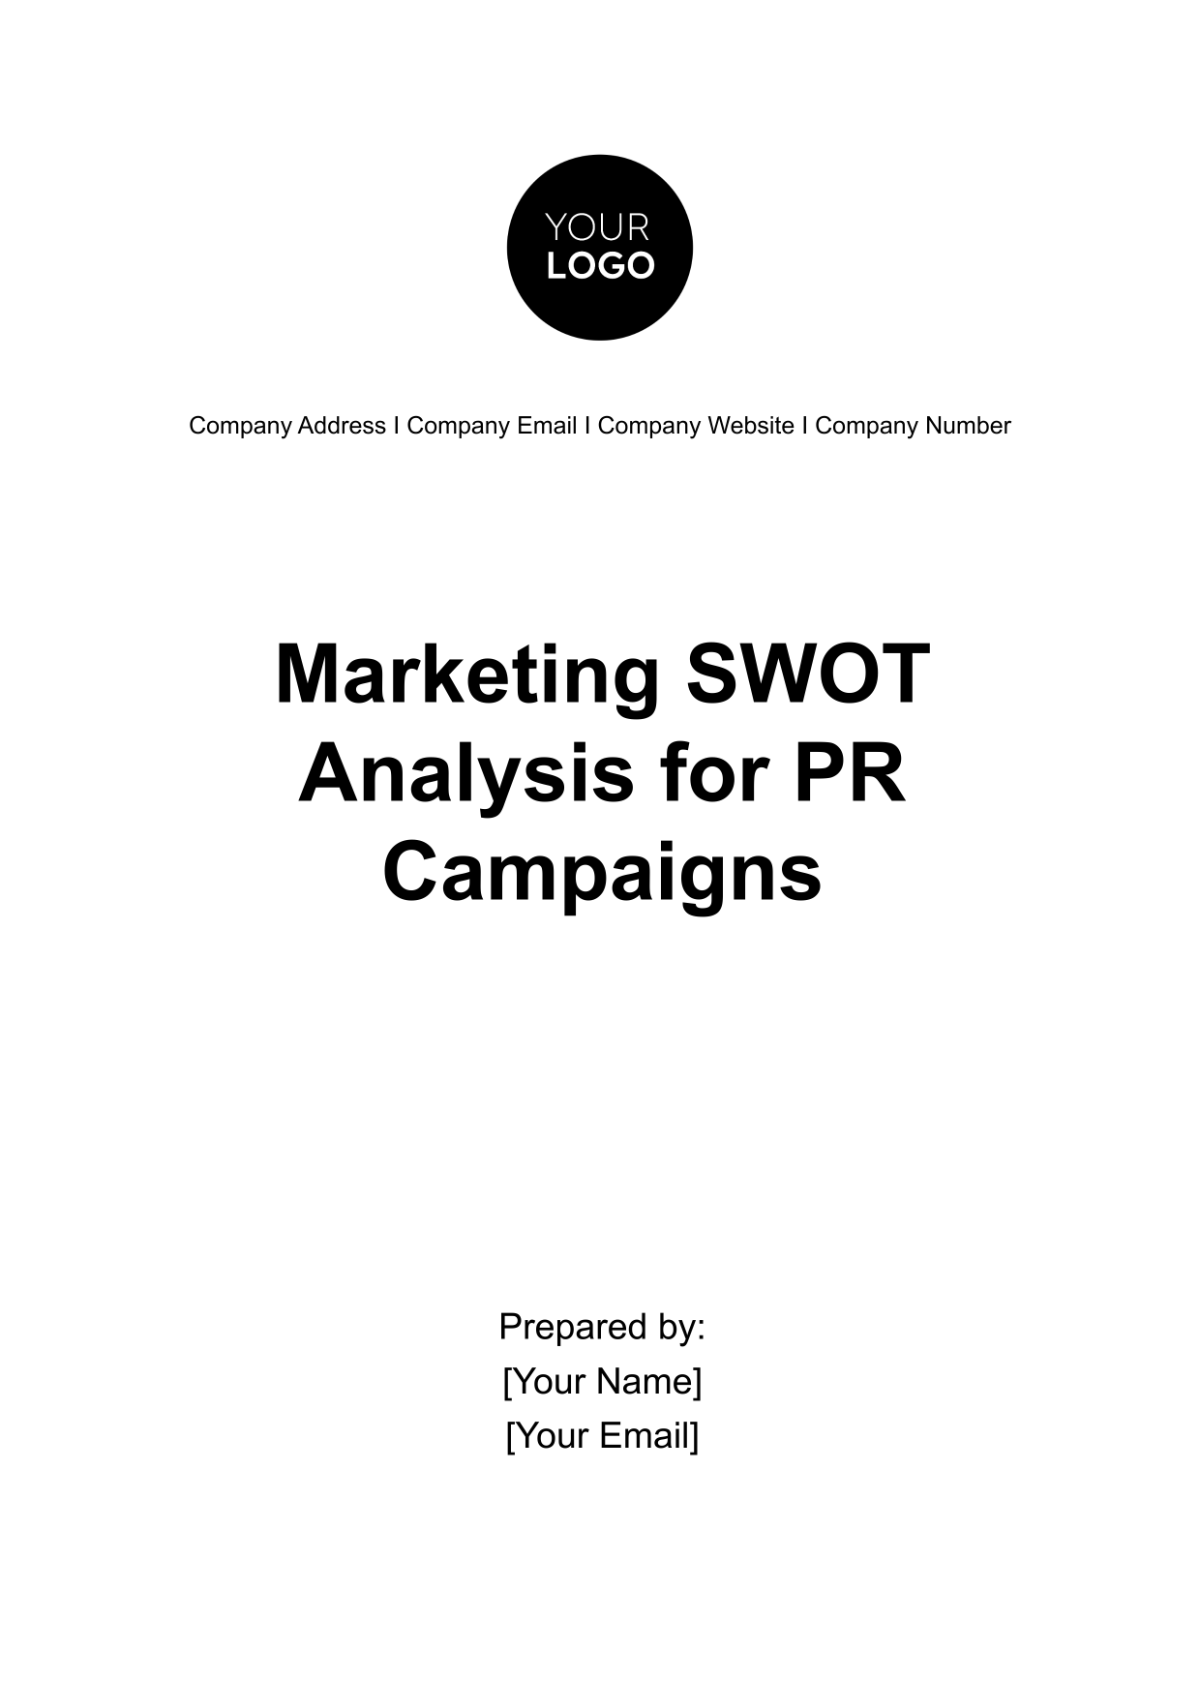 Marketing SWOT Analysis for PR Campaigns Template